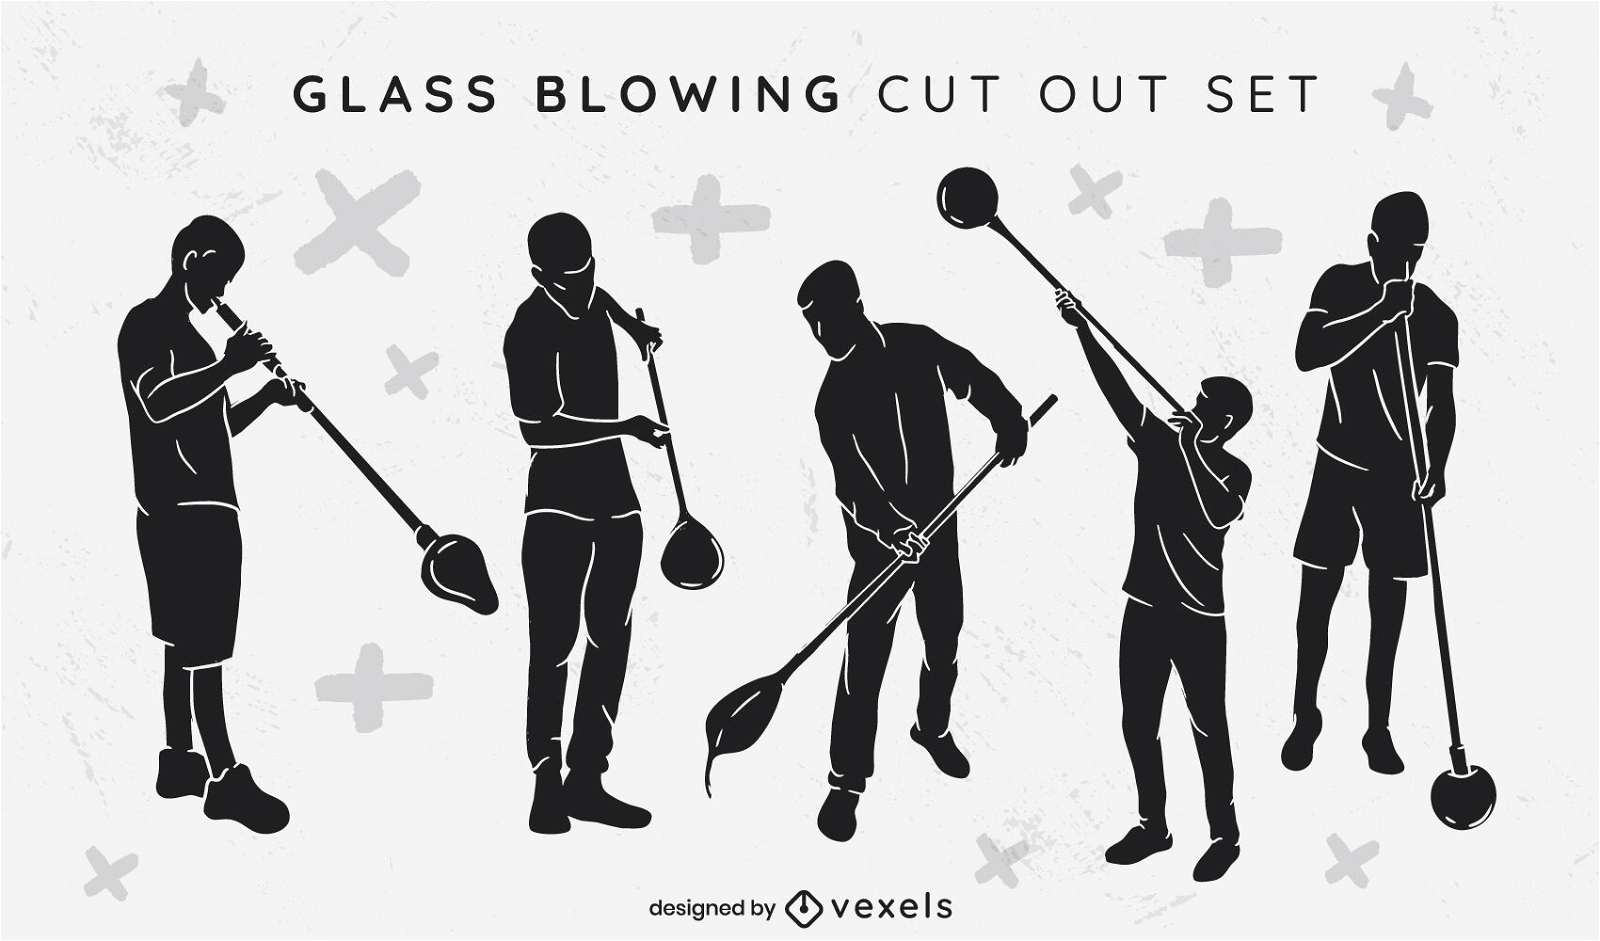 Glass blowing people cut out set